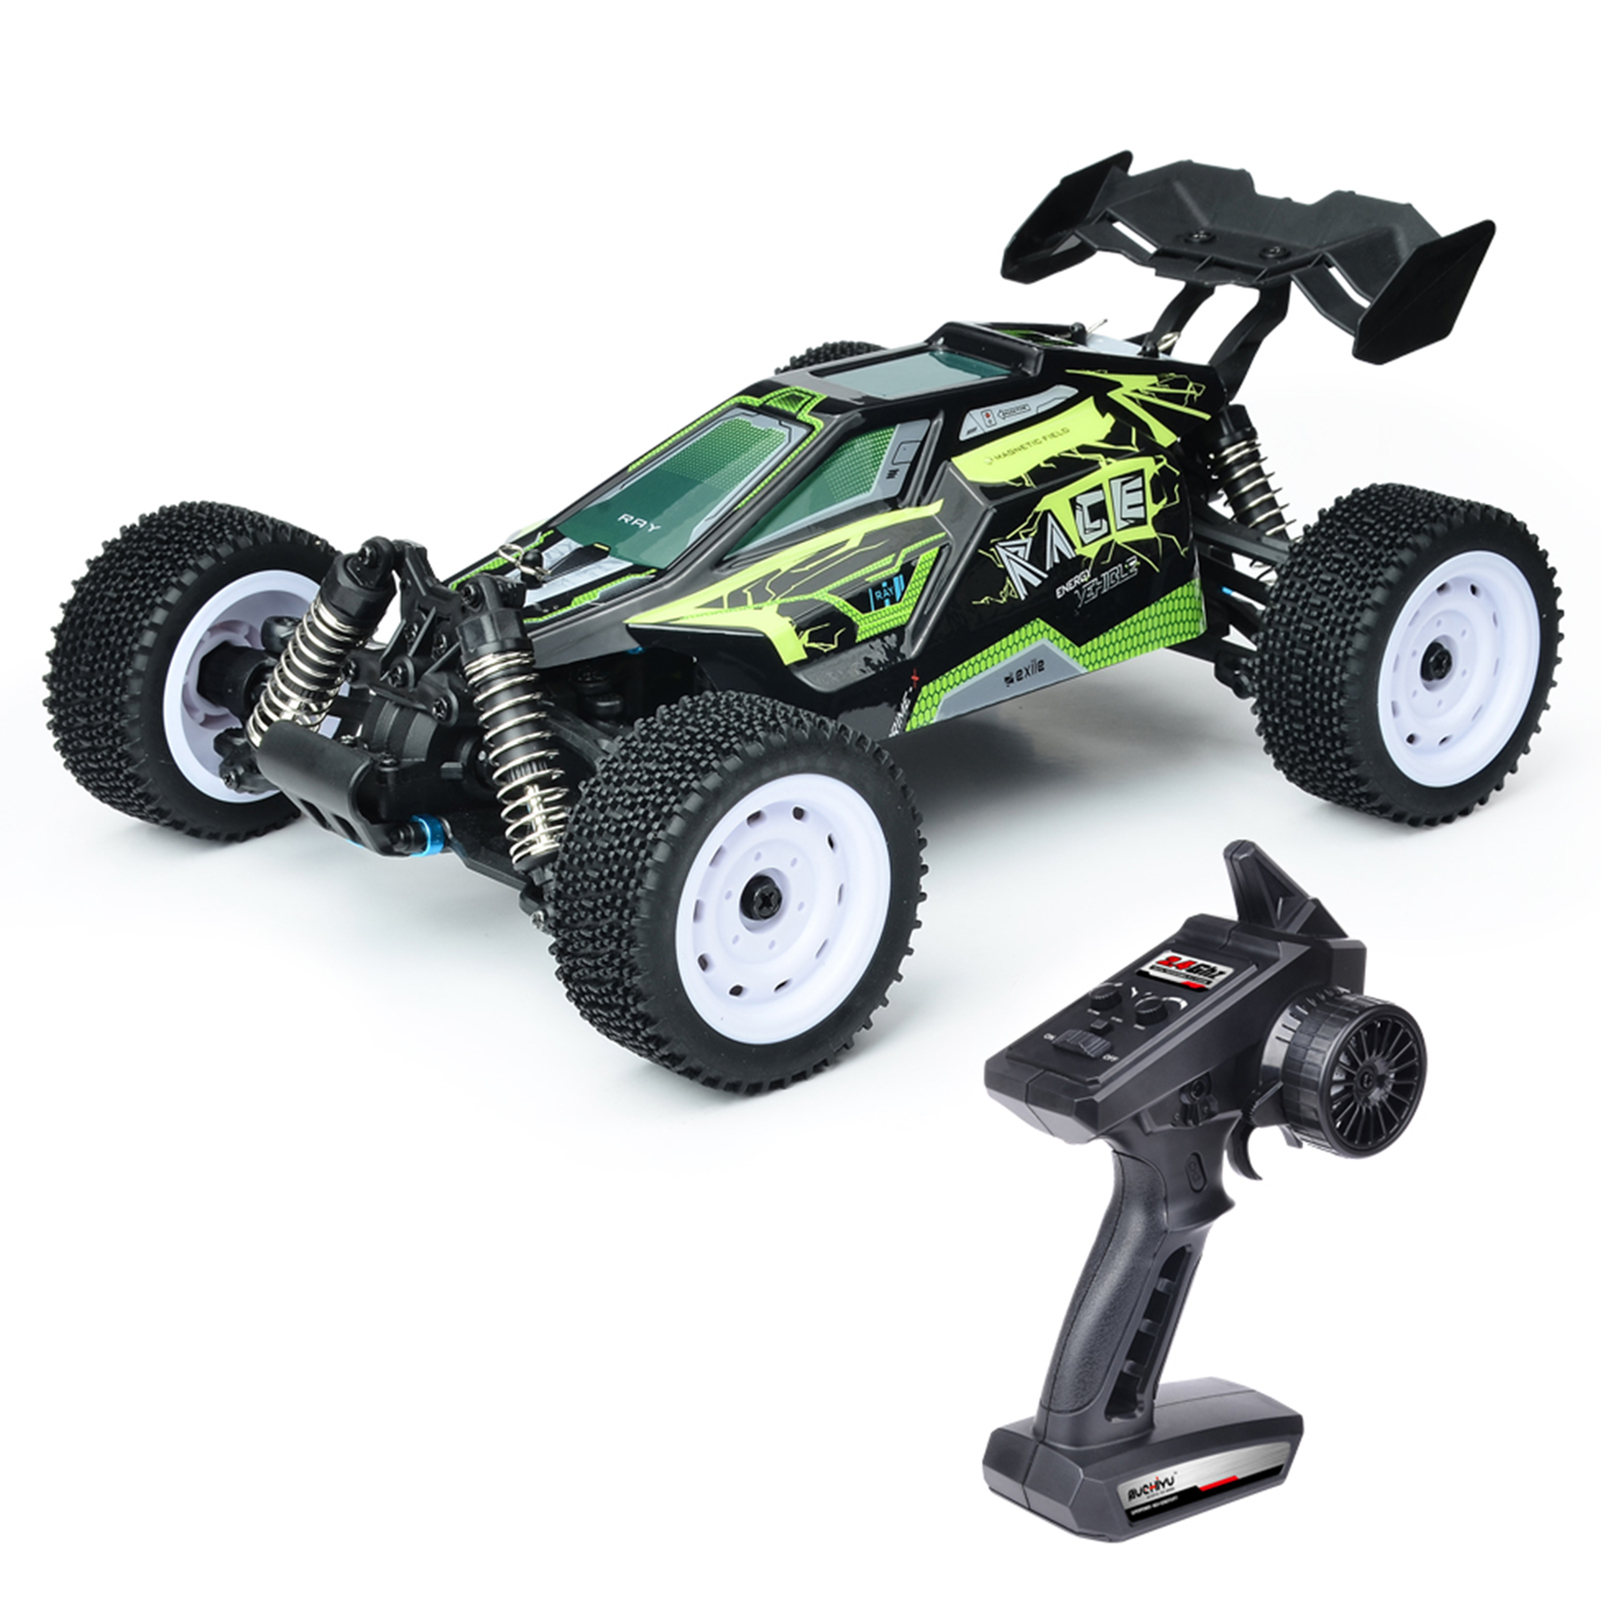 Off-Road Car  Truck  Car High Speed 35kmh 116 2.4GHz Racing Car 4WD  for Boys with 2 Battery - image 2 of 7